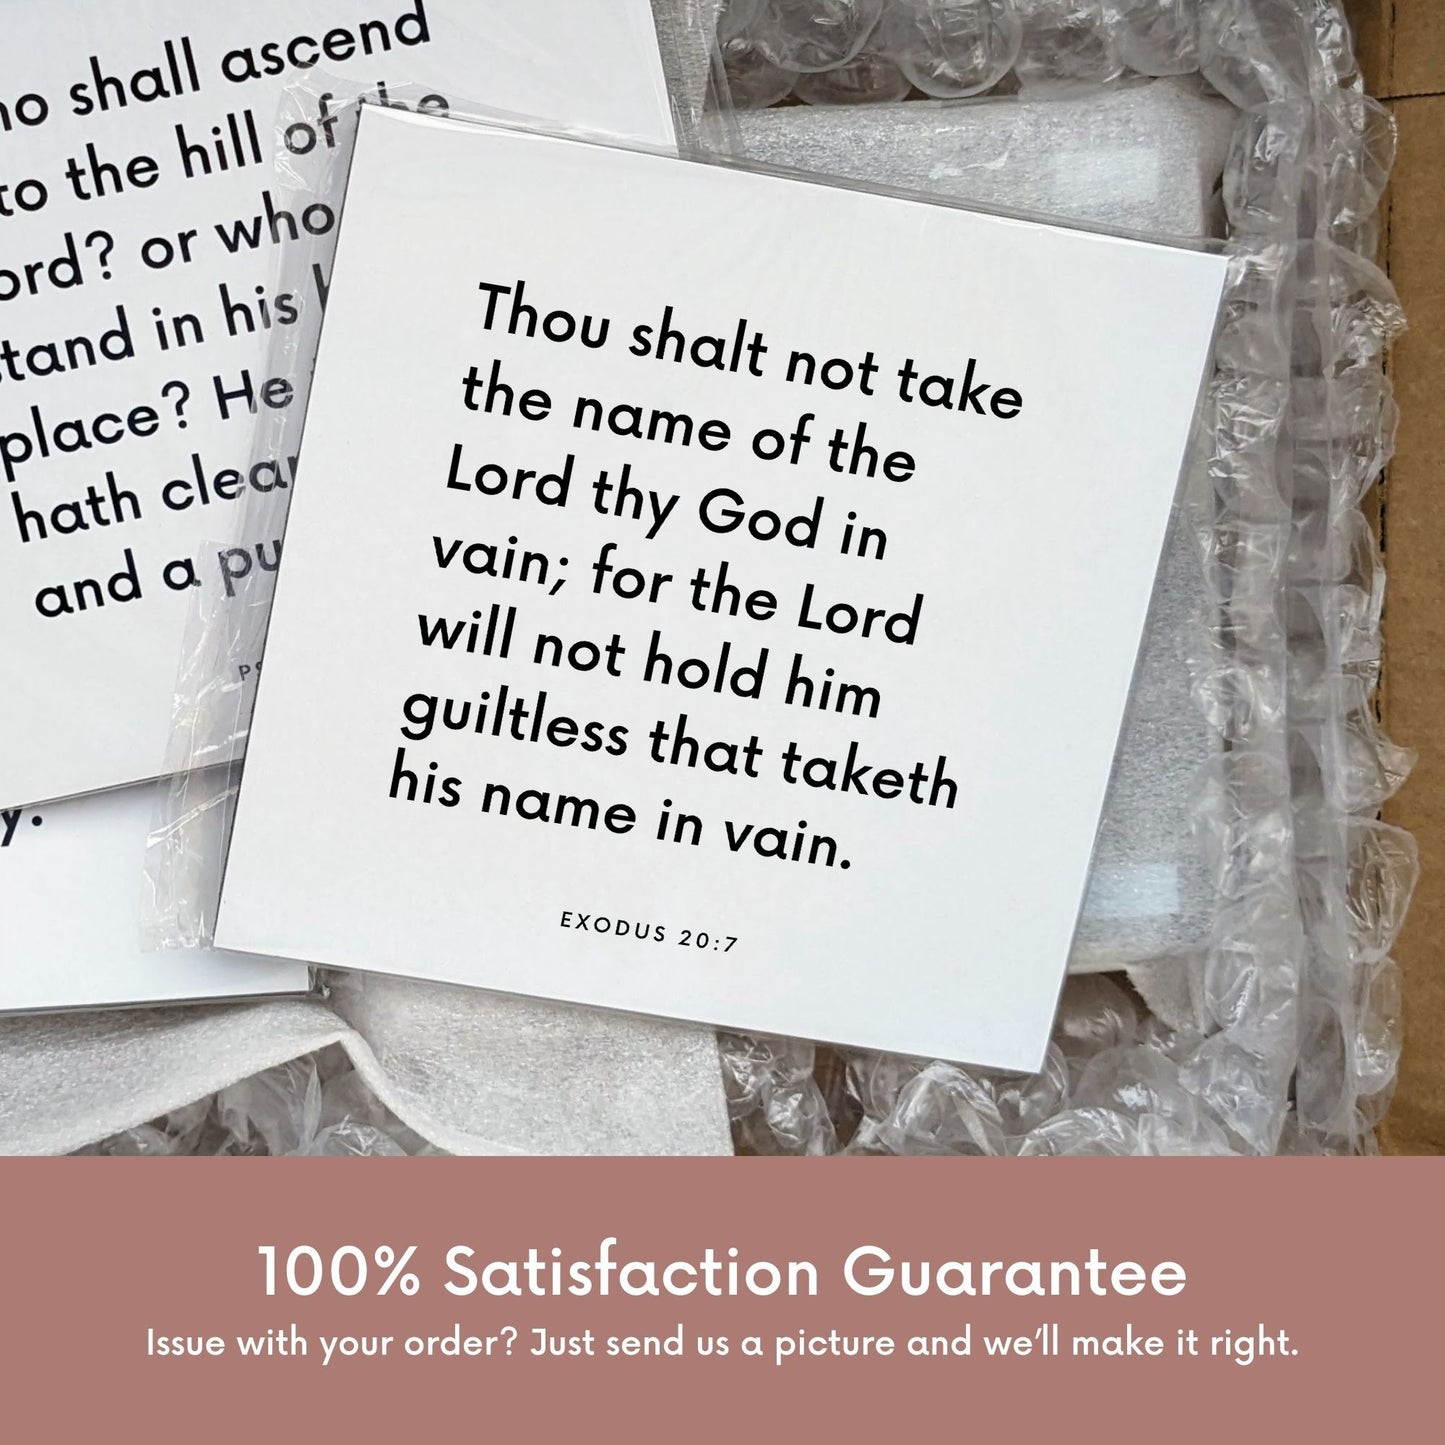 Shipping materials for scripture tile of Exodus 20:7 - "Thou shalt not take the name of the Lord thy God in vain"